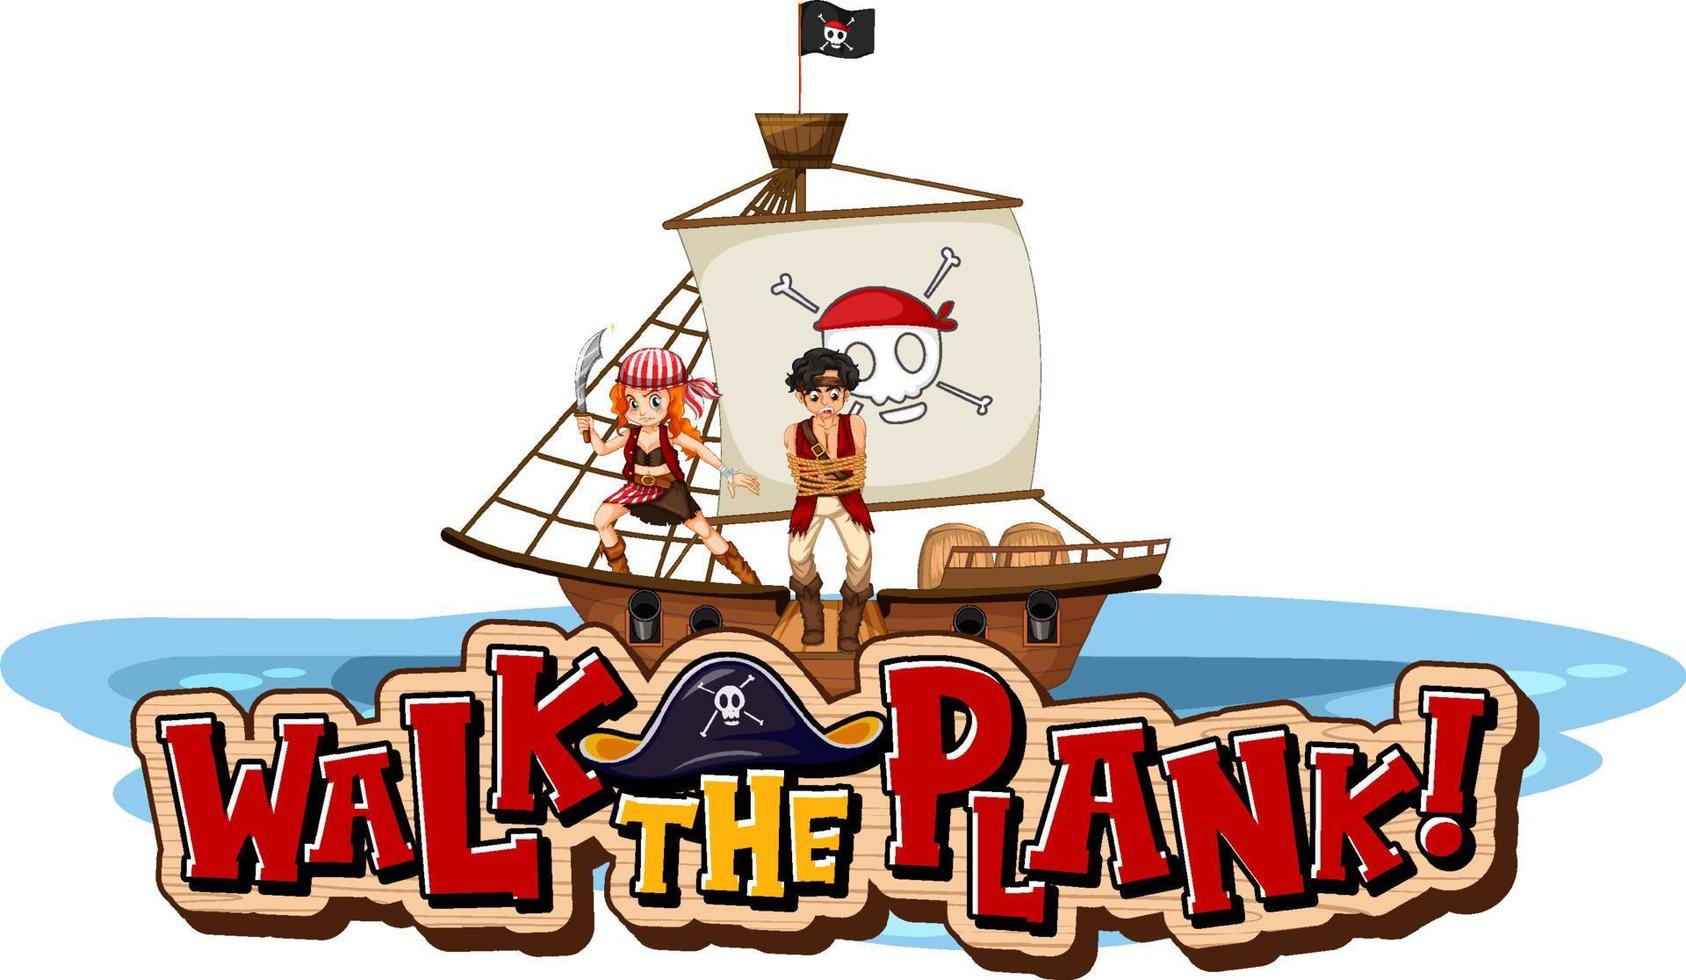 Walk the plank font banner with pirate character on the pirate ship vector